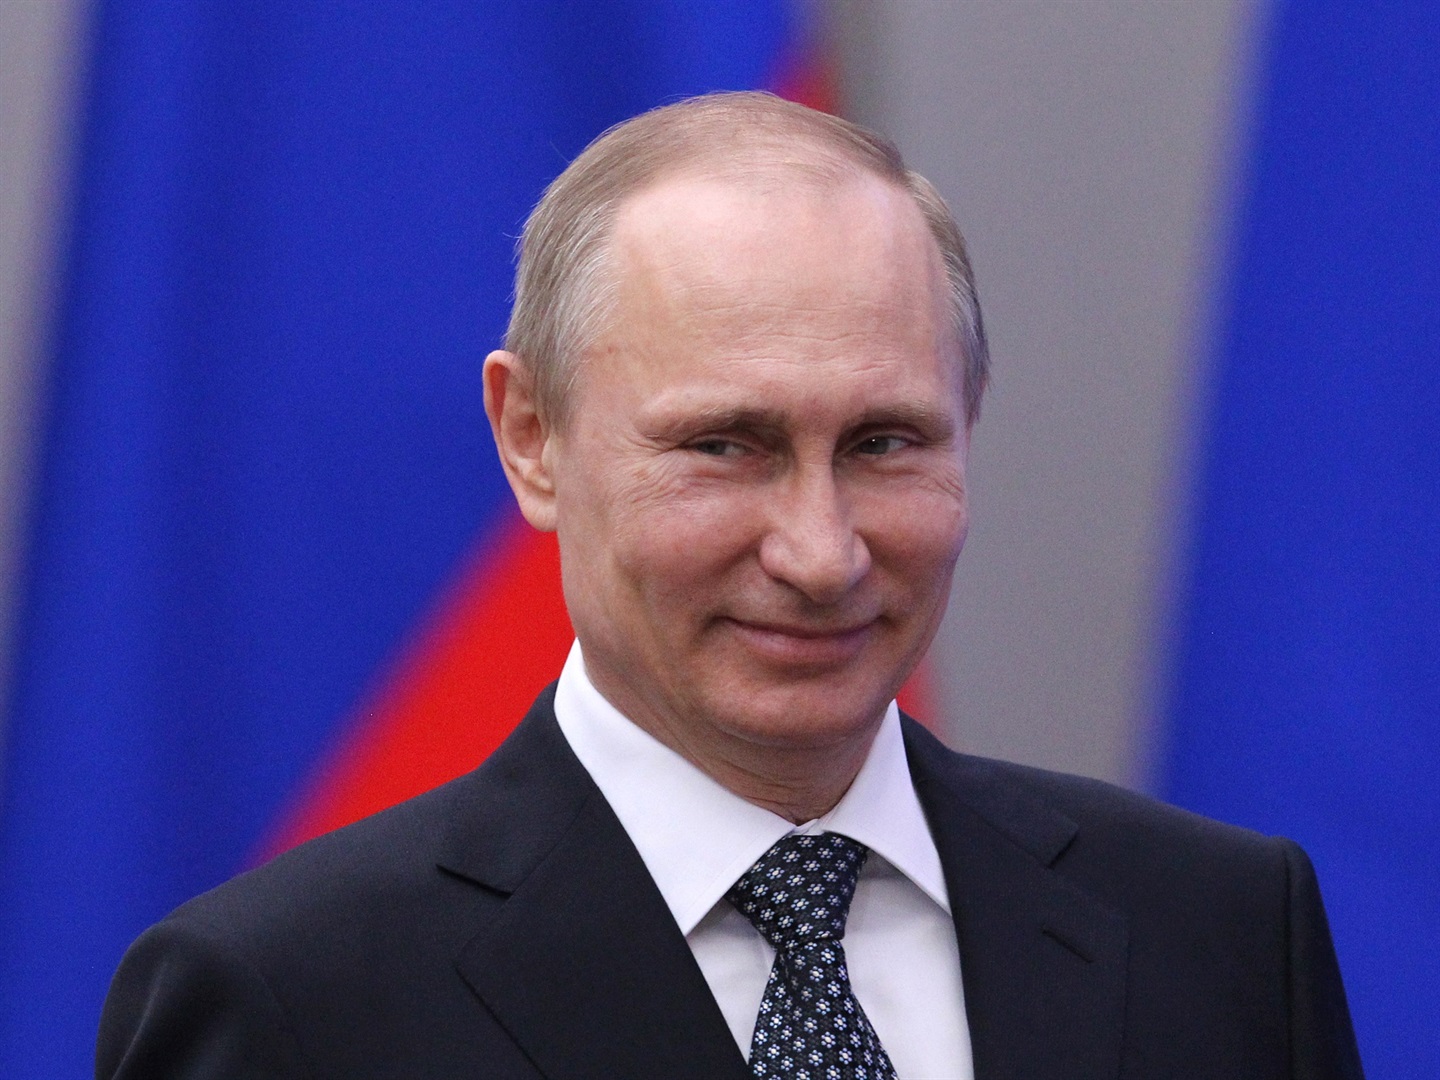 The ICC has issued an arrest warrant for Russian President Vladimir Putin.